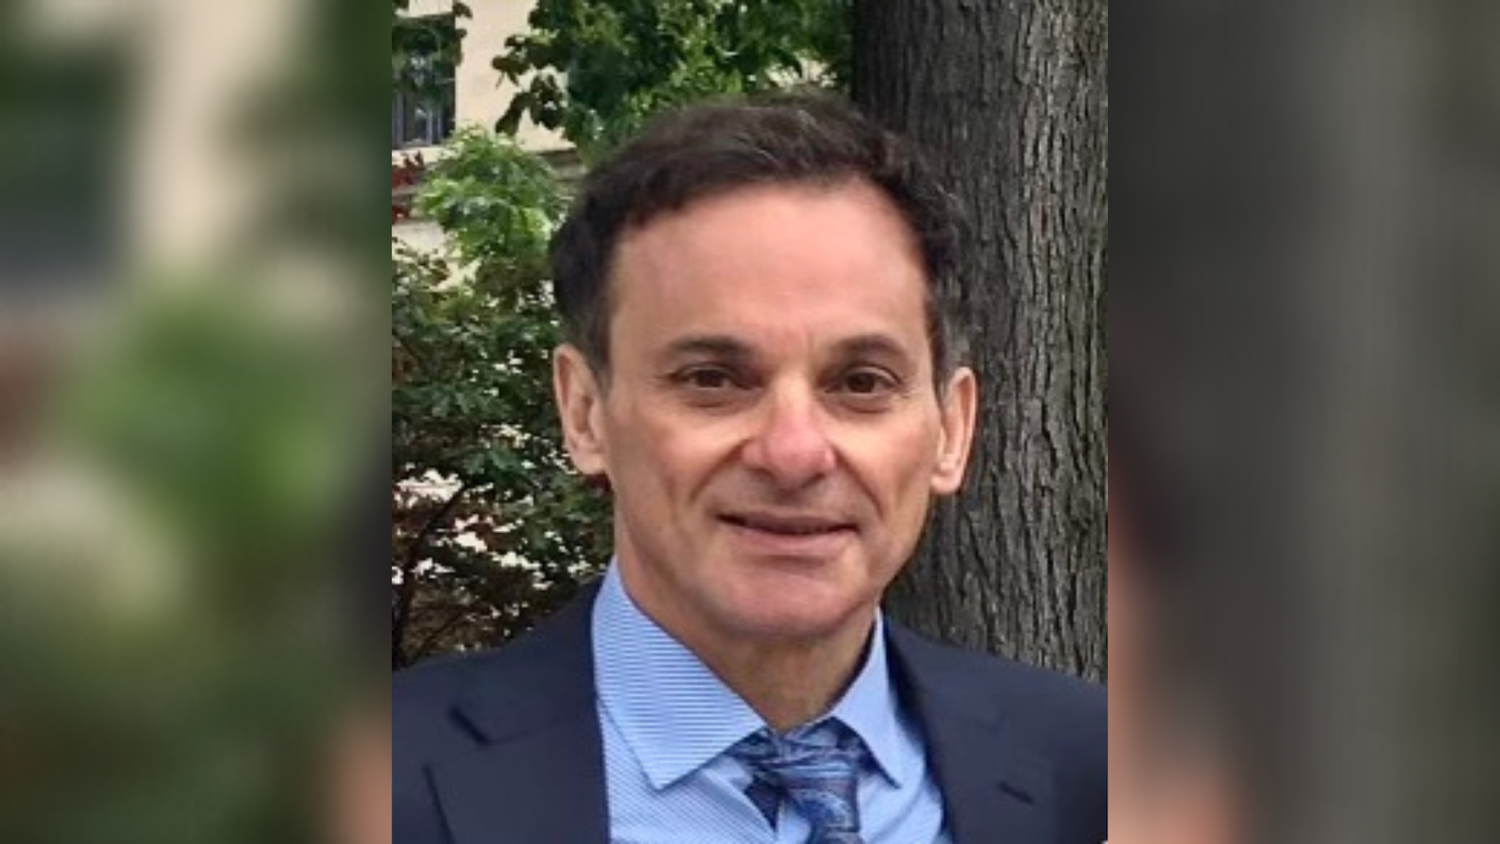 Dr. Lino Lagrotteria is a family physician in Hamilton, Ont., an assistant clinical professor in the department of family medicine at McMaster University and a member of the PrescribeIT Clinical Advisory Sub-Committee. SUPPLIED